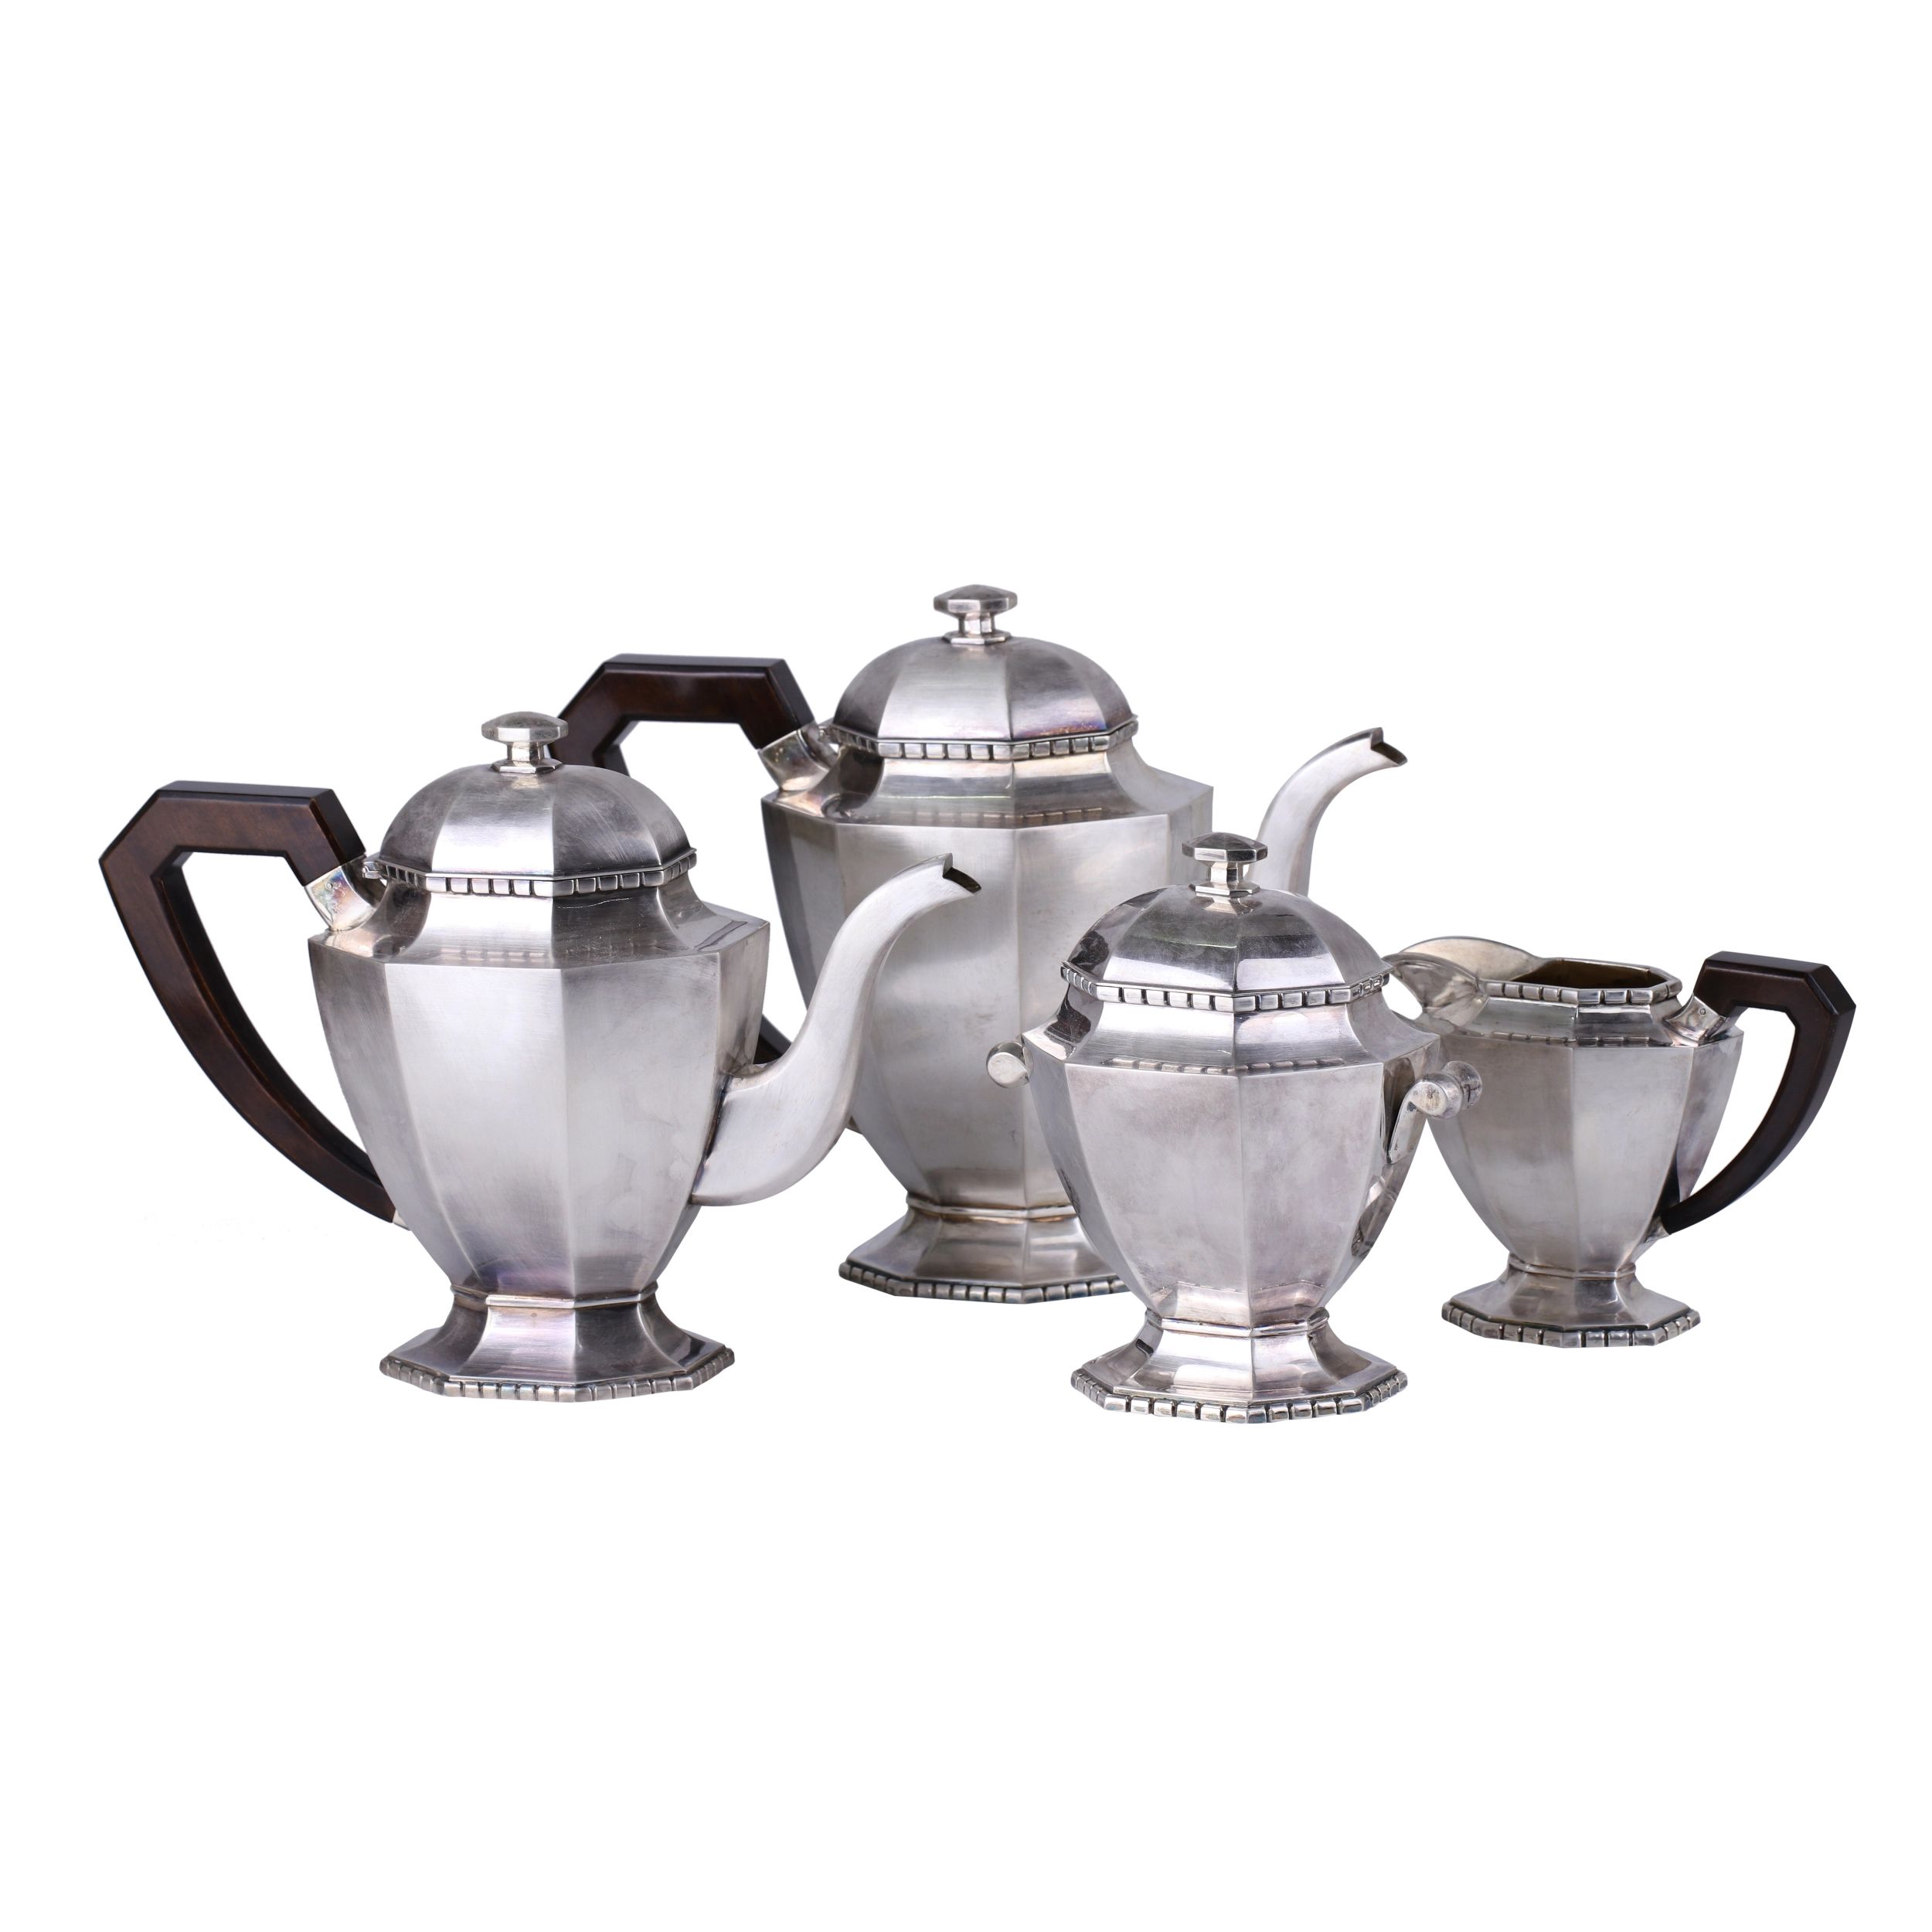 Silver-tea-and-coffee-set-in-Art-Deco-style-